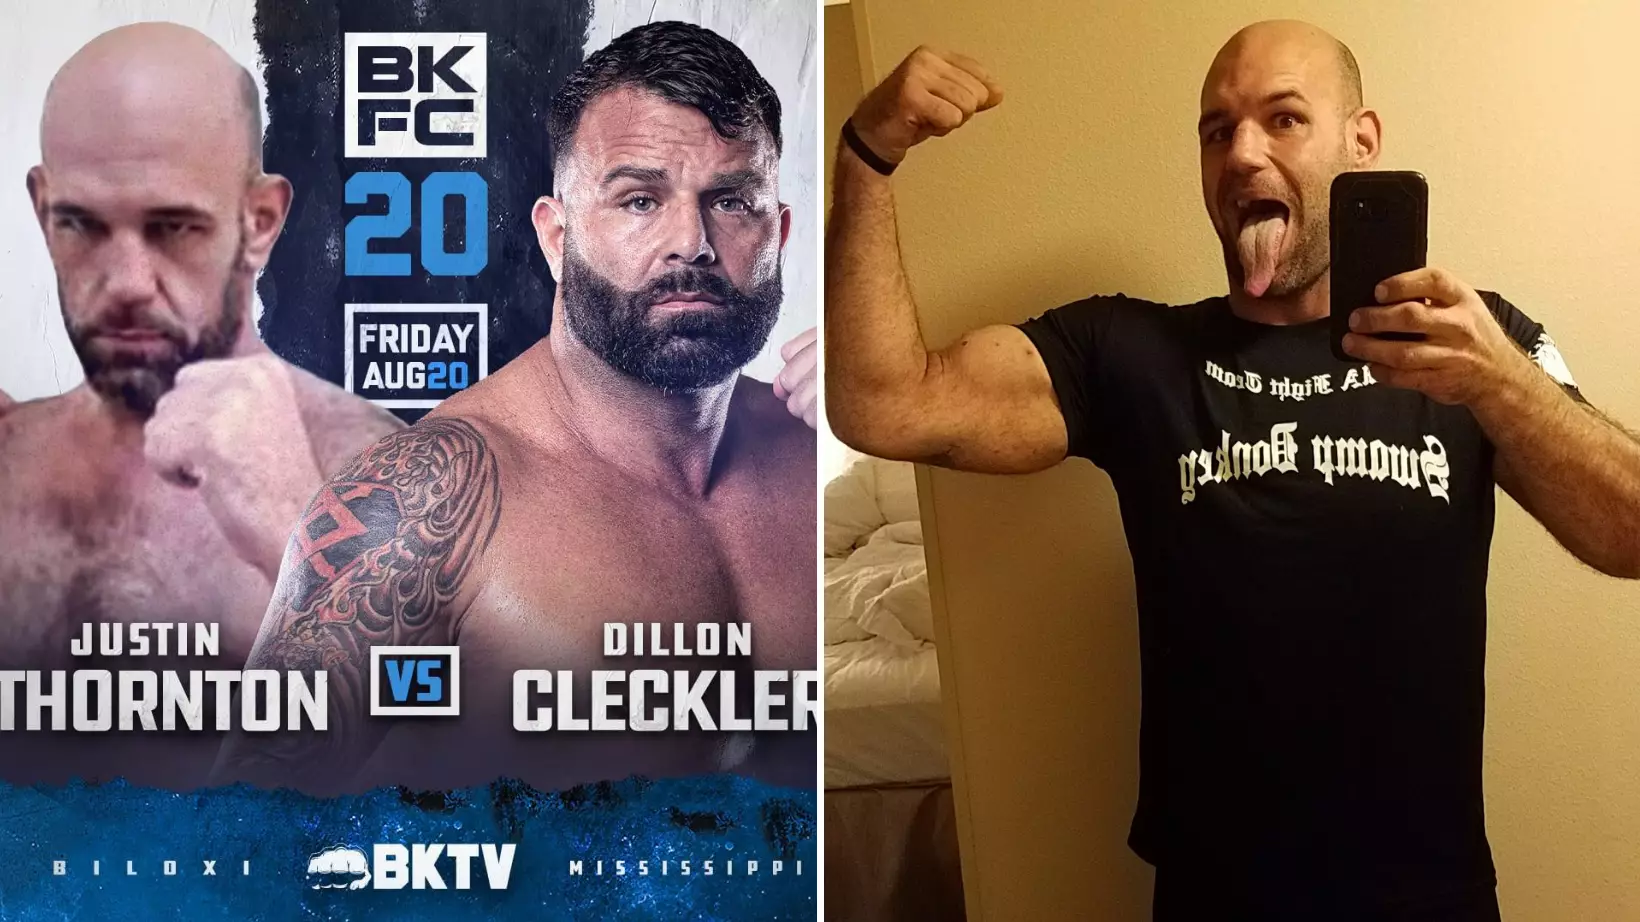 Bare Knuckle Fighter Justin Thornton Tragically Dies After KO Loss At BKFC 20